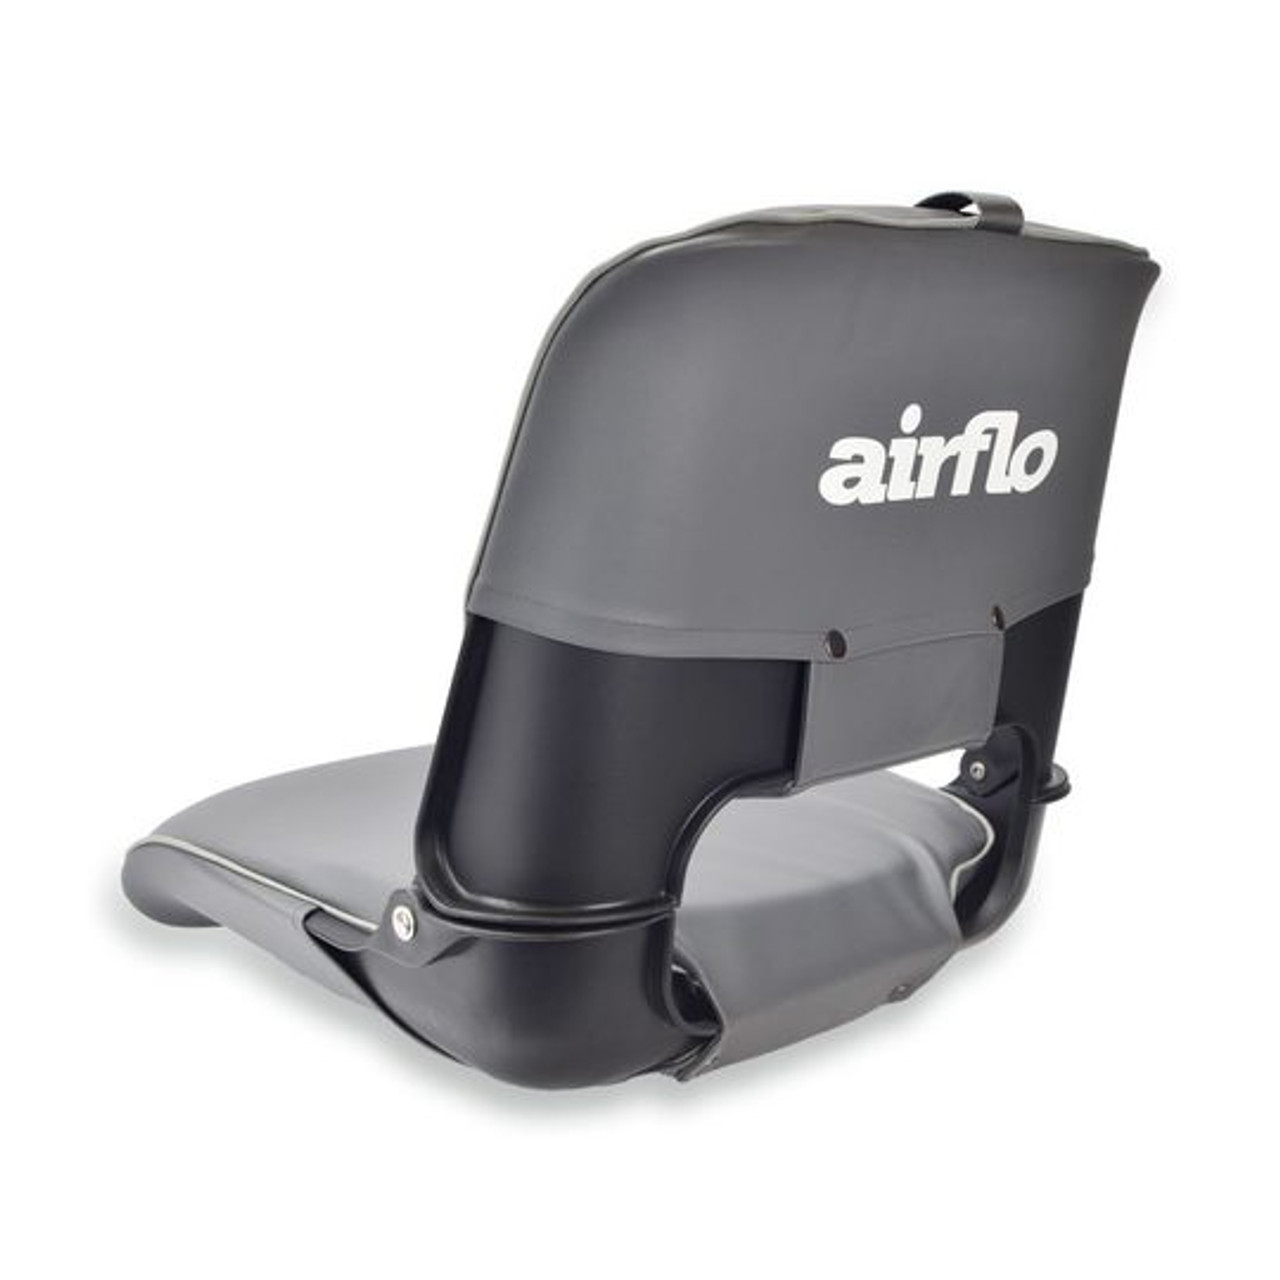 Airflow Superlite Boat Seat - Includes Clamp & Swivel